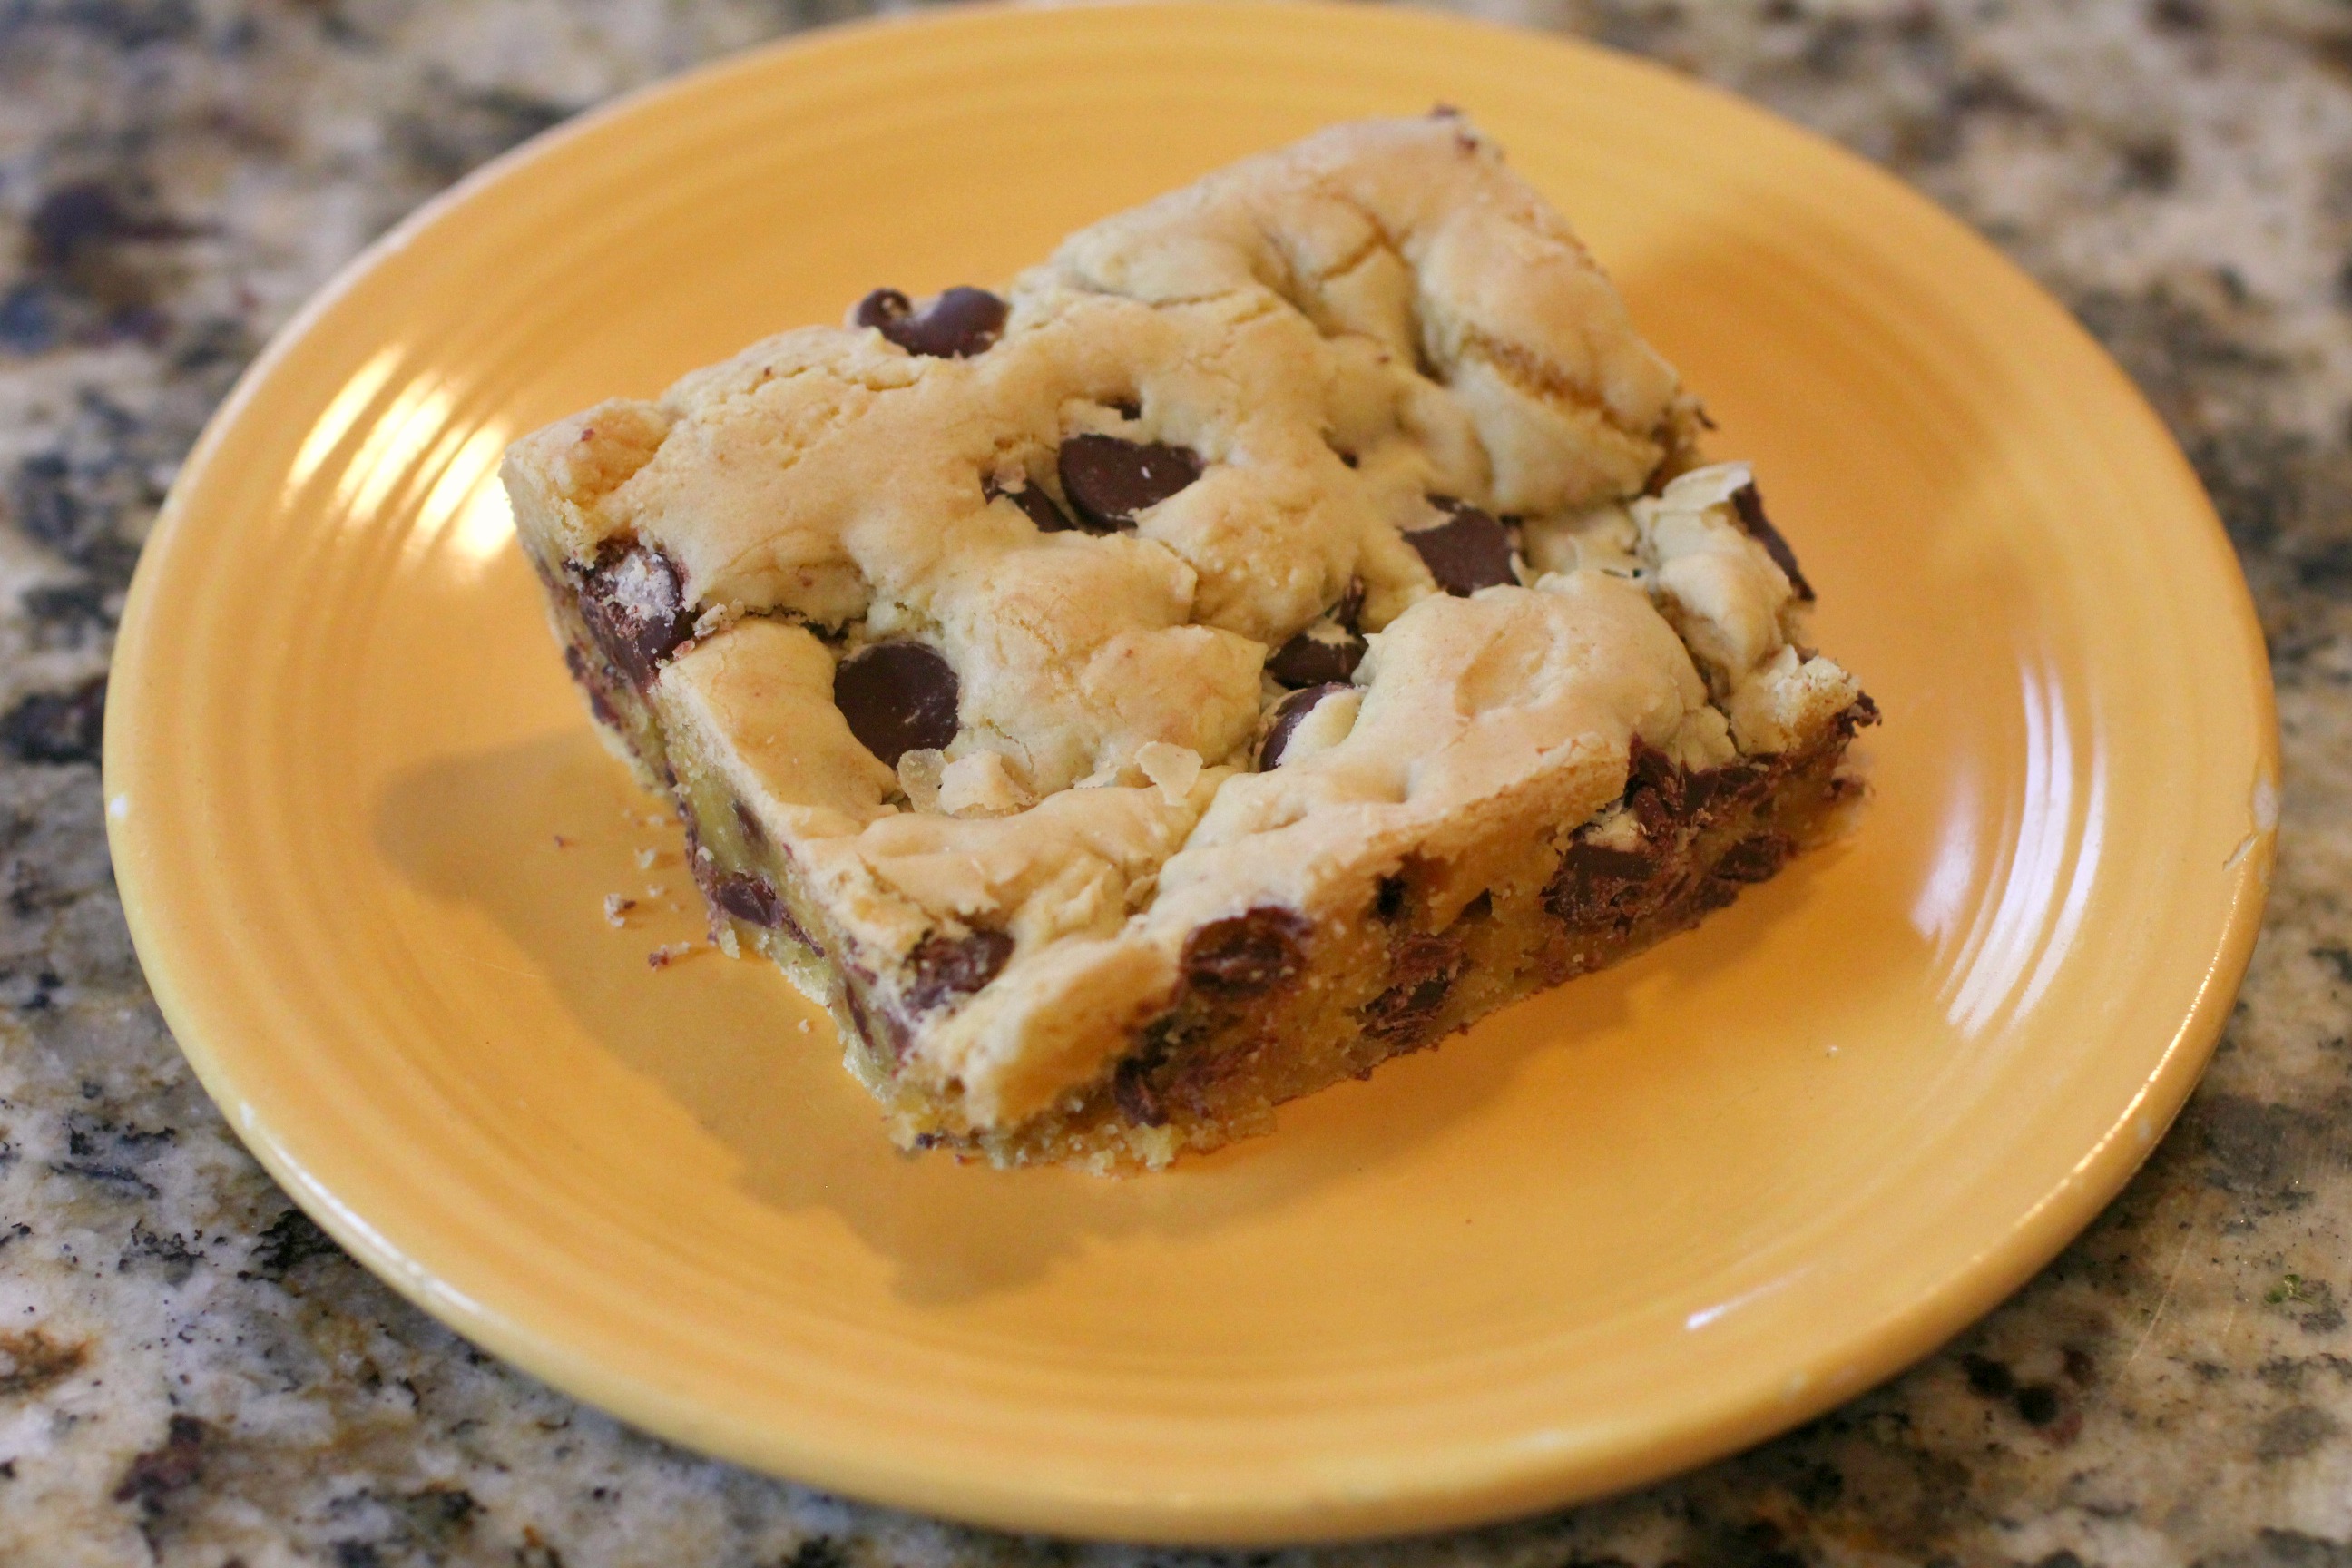 Little Hiccups: Chocolate Chip Cookie Cake